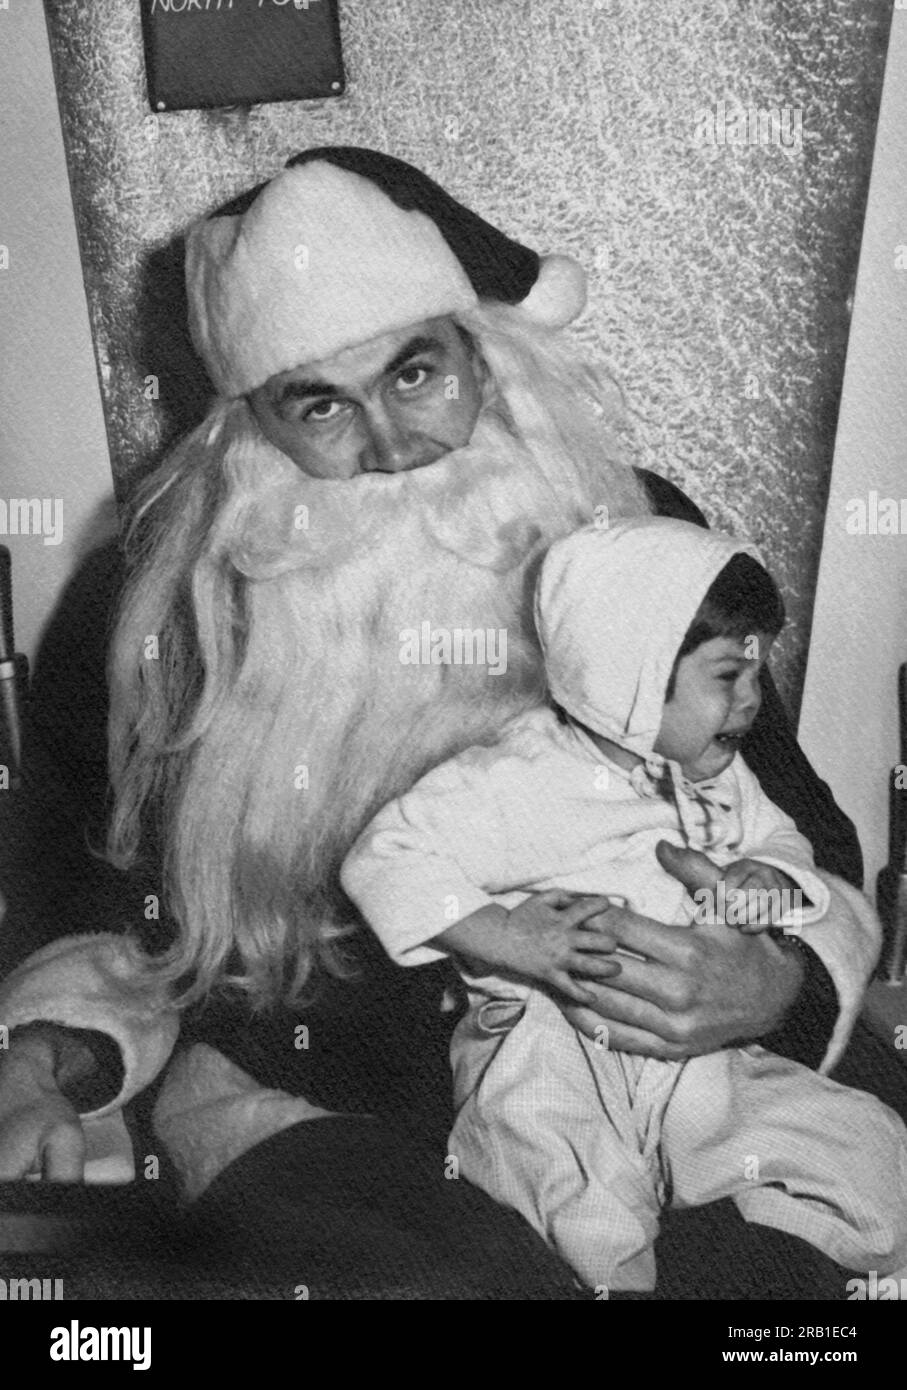 United States:   1951 A frustrated Santa Claus holding an unhappy and crying toddler on his lap. Stock Photo